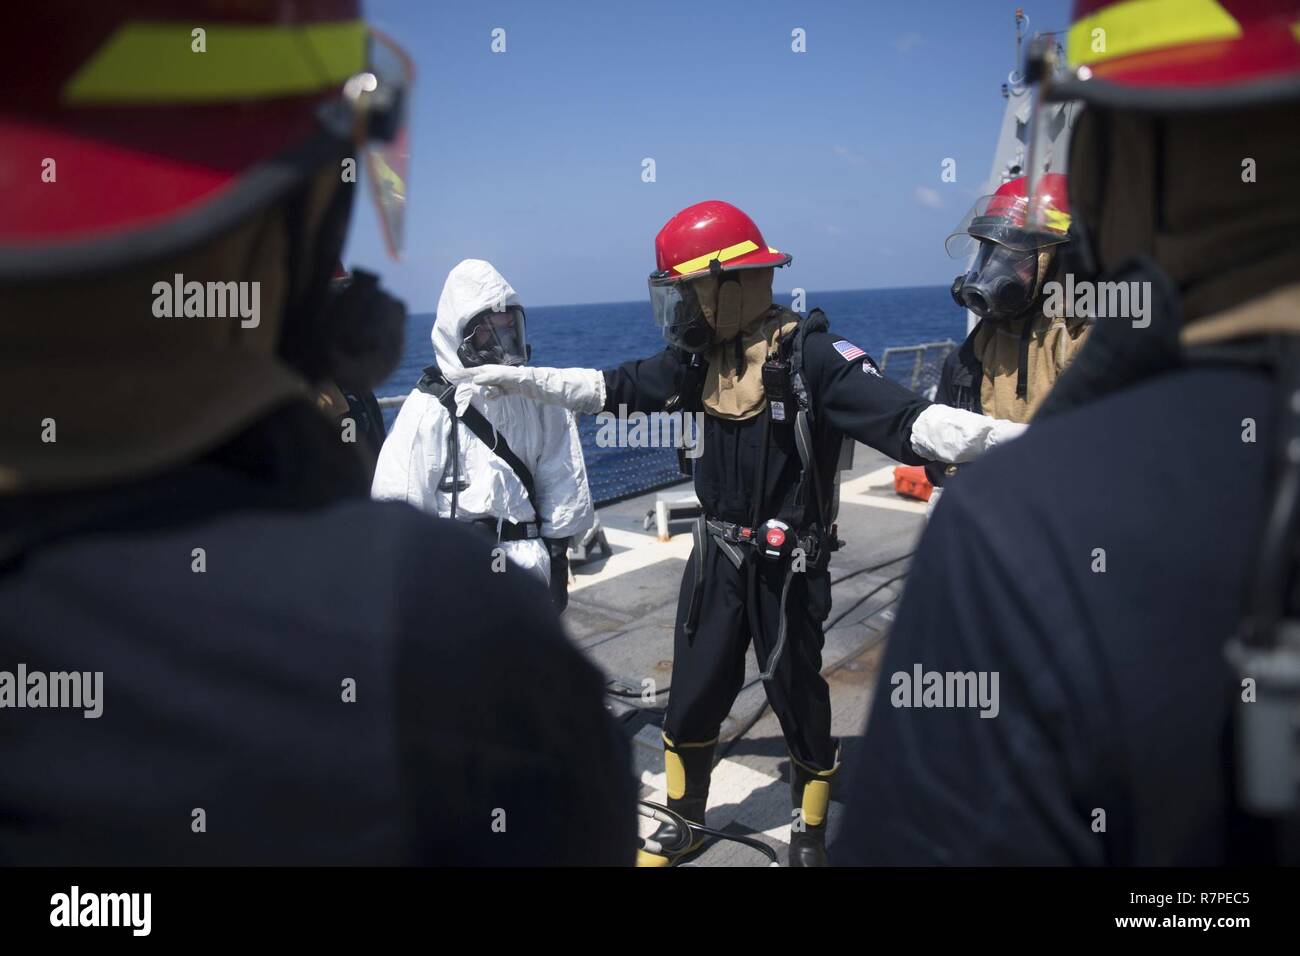 SOUTH CHINA SEA (March 20, 2017) Damage Controlman 2nd Class Terray Franklin, from Houston, directs Sailors during a toxic gas drill aboard Arleigh Burke-class guided-missile destroyer USS Michael Murphy (DDG 112). Michael Murphy is on a regularly scheduled Western Pacific deployment with the Carl Vinson Carrier Strike Group as part of the U.S. Pacific Fleet-led initiative to extend the command and control functions of U.S. 3rd Fleet. U.S. Navy aircraft carrier strike groups have patrolled the Indo-Asia-Pacific regularly and routinely for more than 70 years. Stock Photo